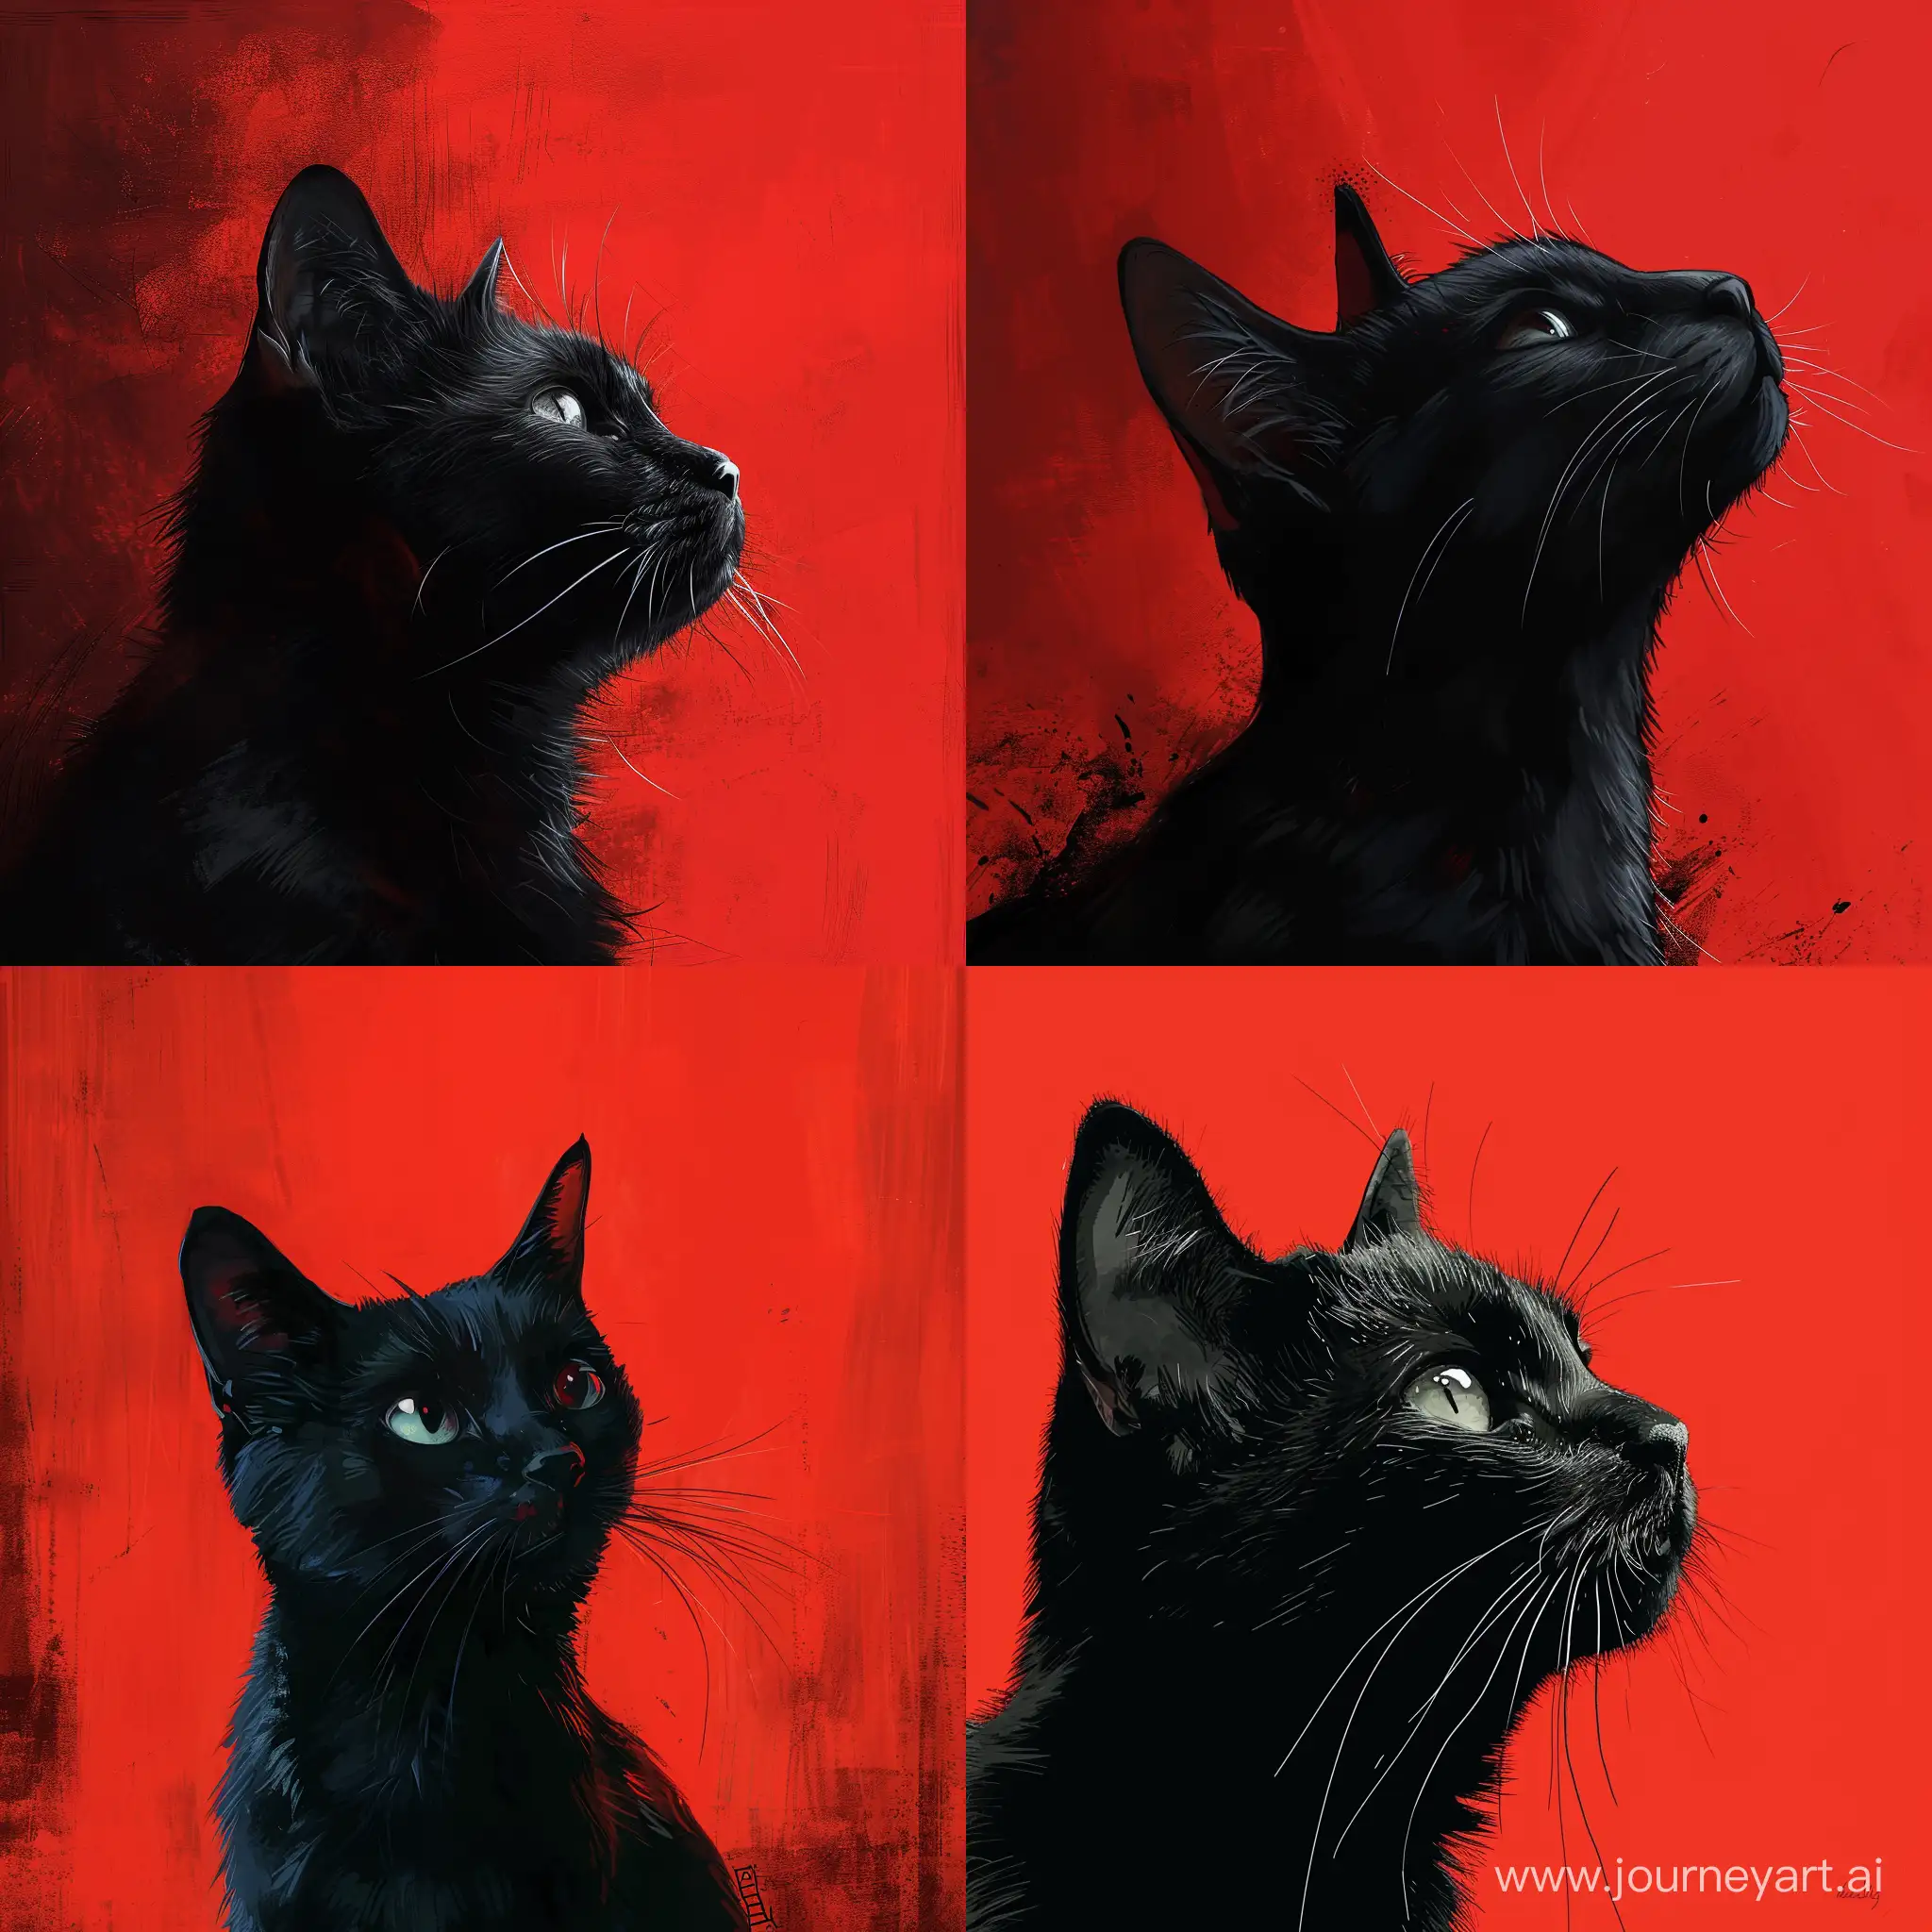 Mystical-Black-Cat-on-Vibrant-Red-Background